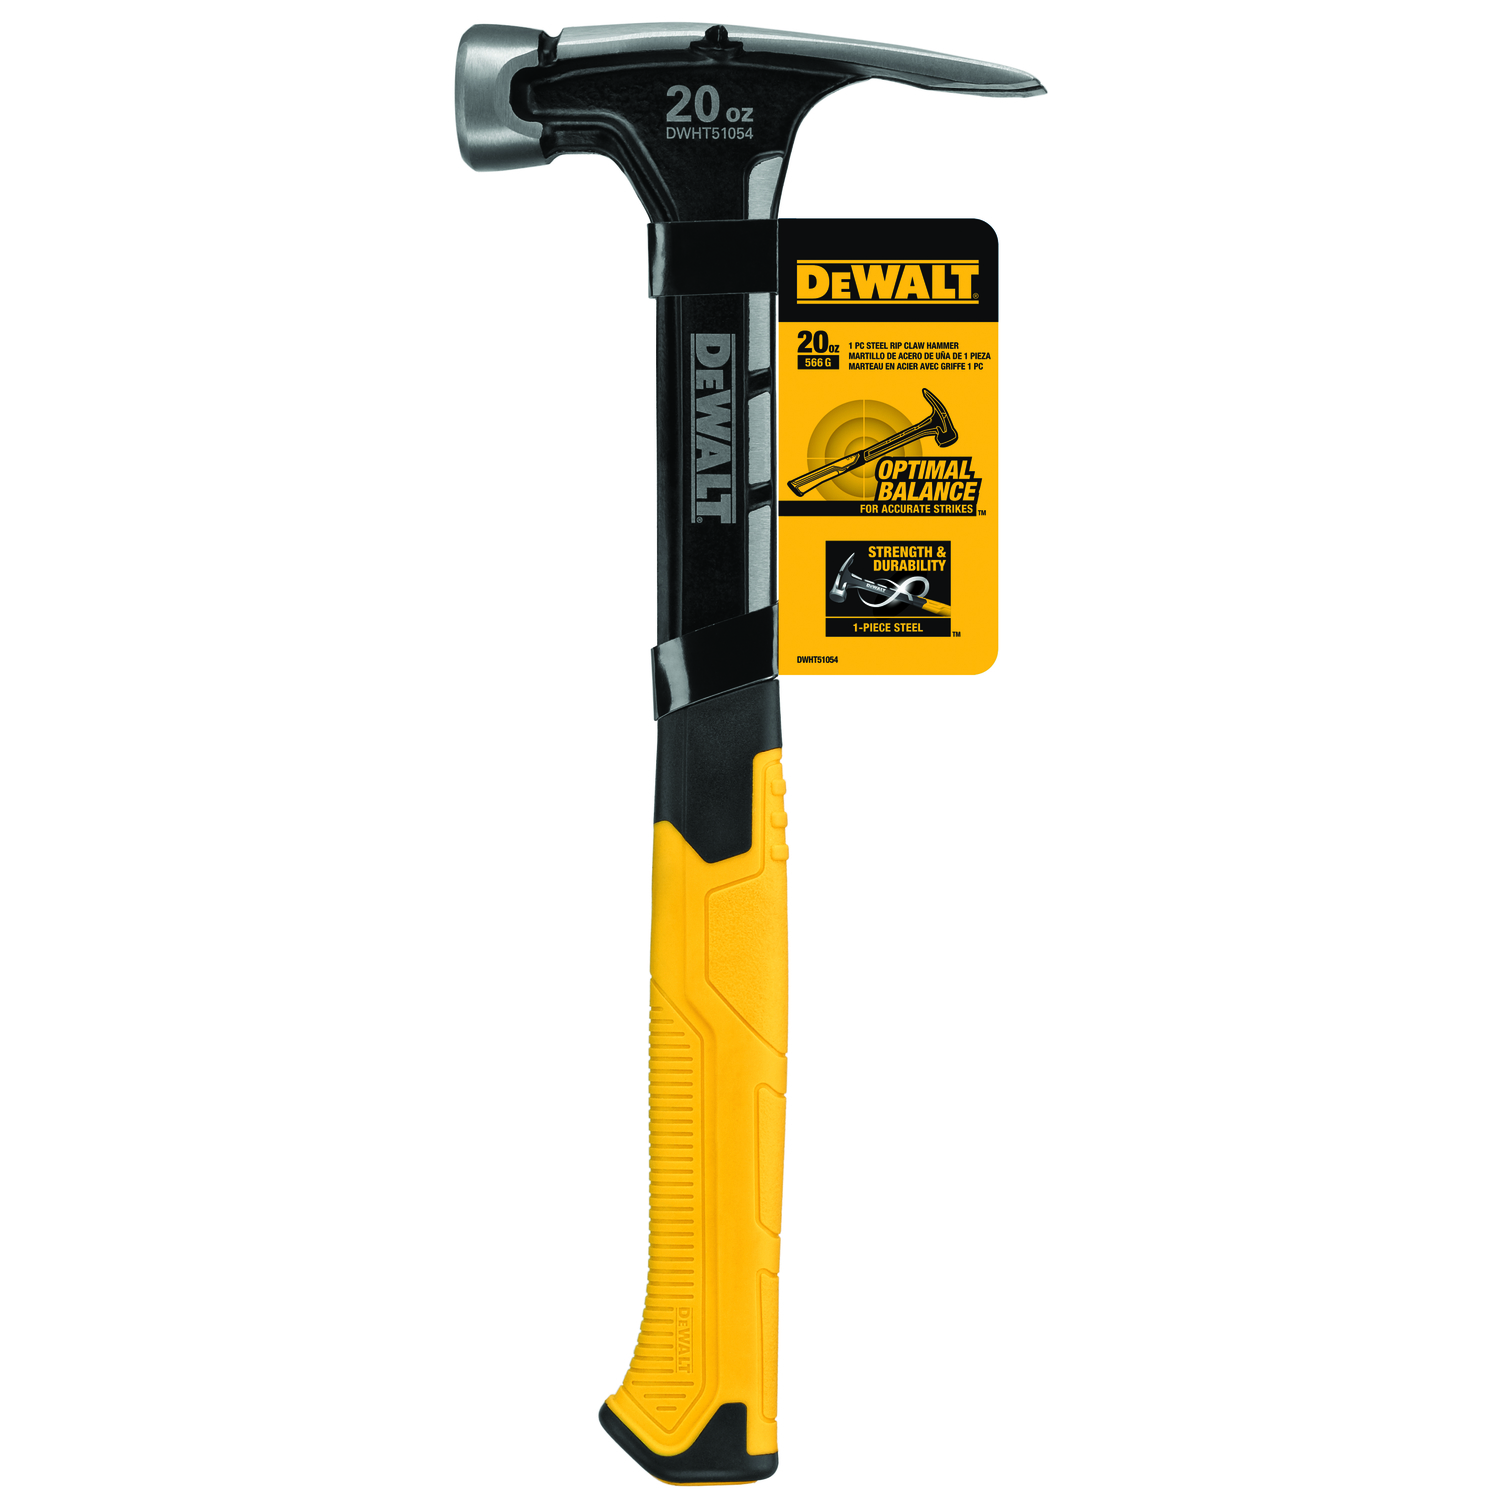 Stanley FatMax 22 Oz. Milled-Face Framing Hammer with Graphite Axe Handle -  S.W. Collins